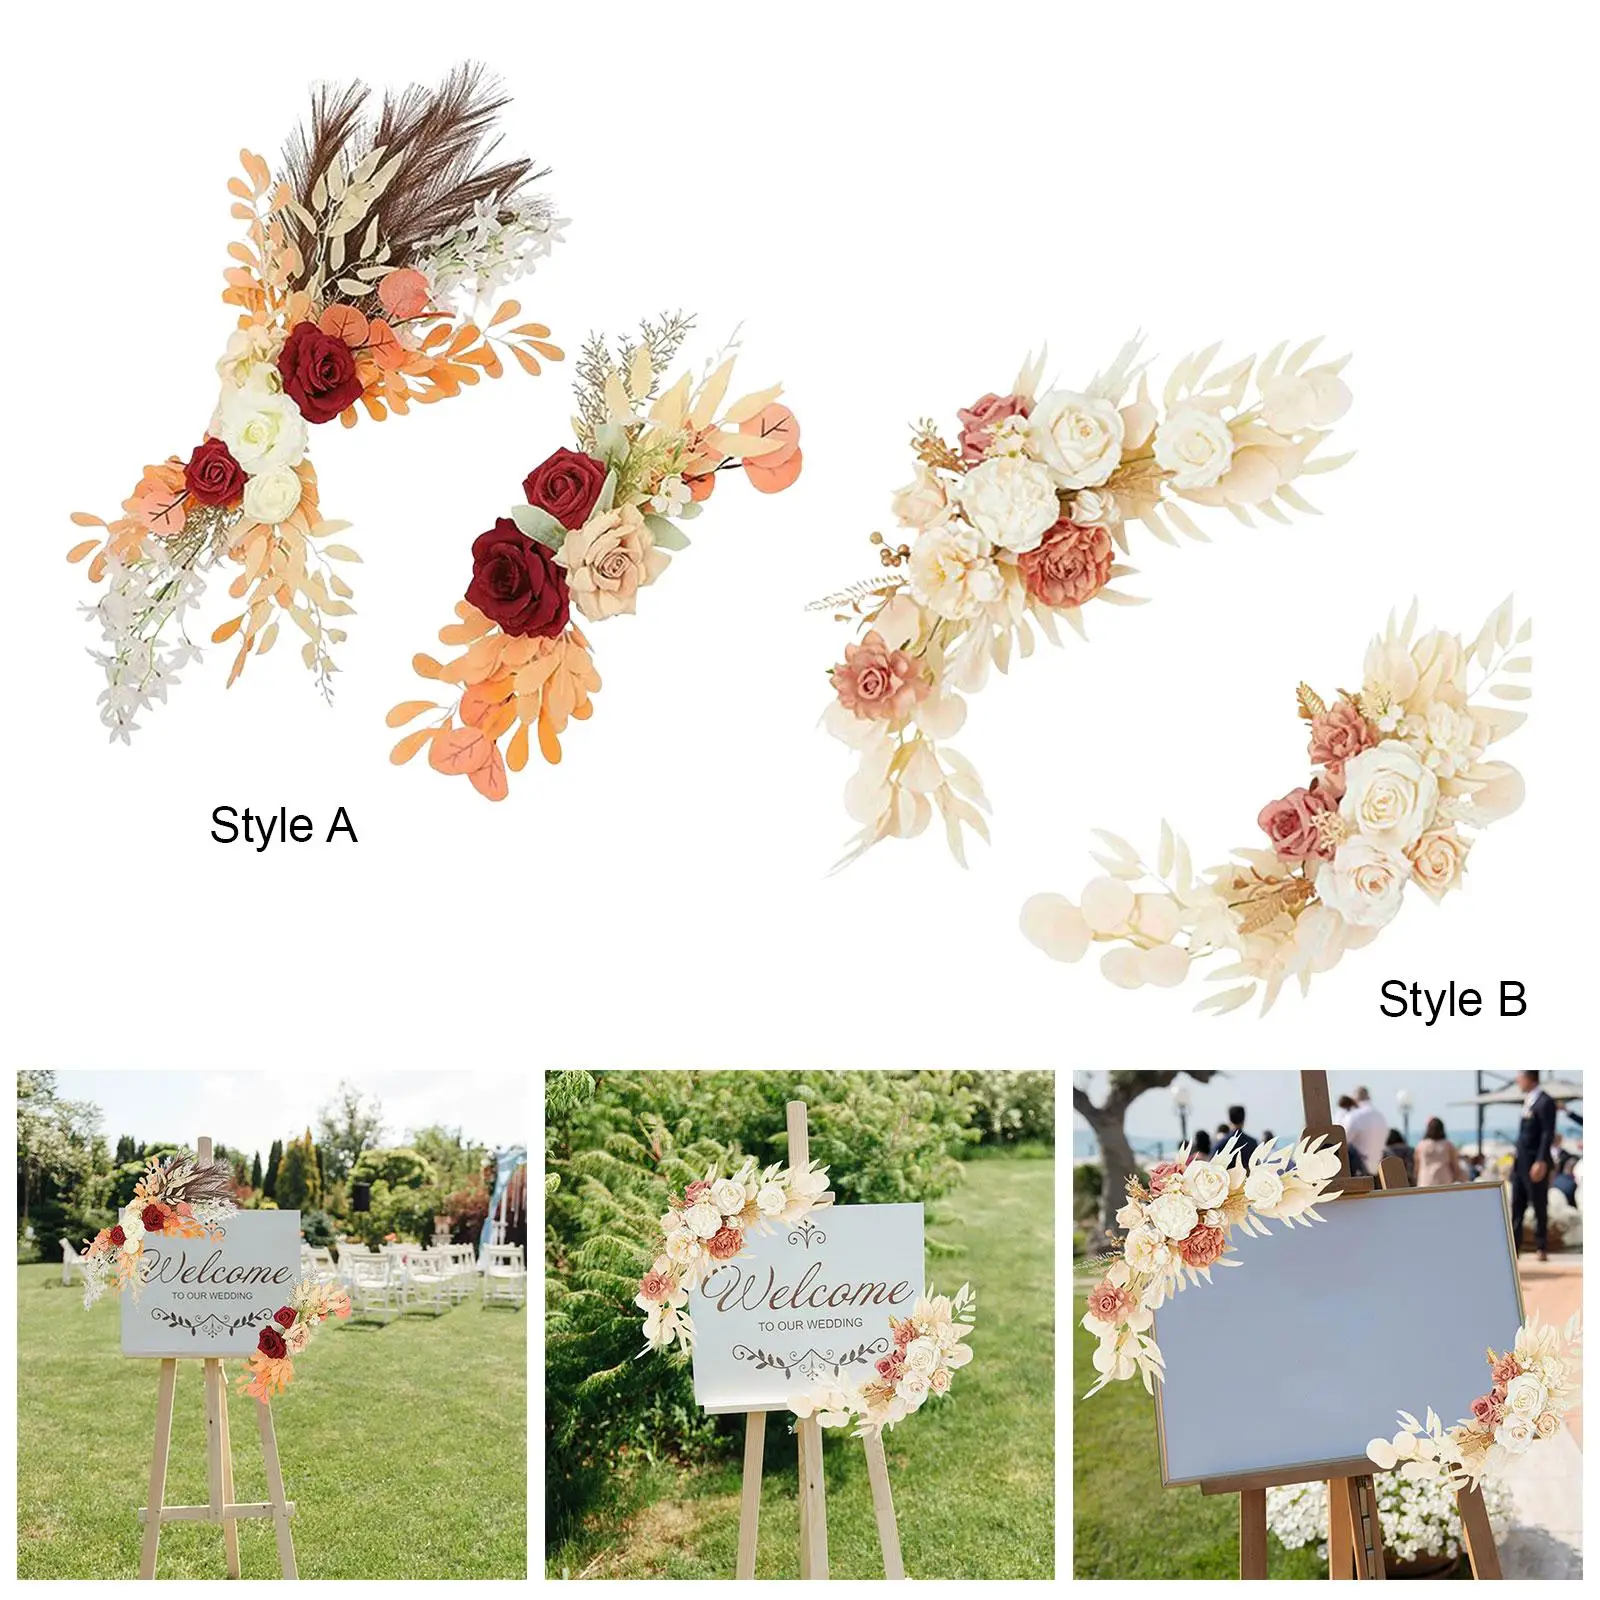 2x Silk Wedding Arch Flower Multicolors Handmade Wedding Welcome Signs for Ceremony Welcome Sign Home Backdrop Floral Decoration